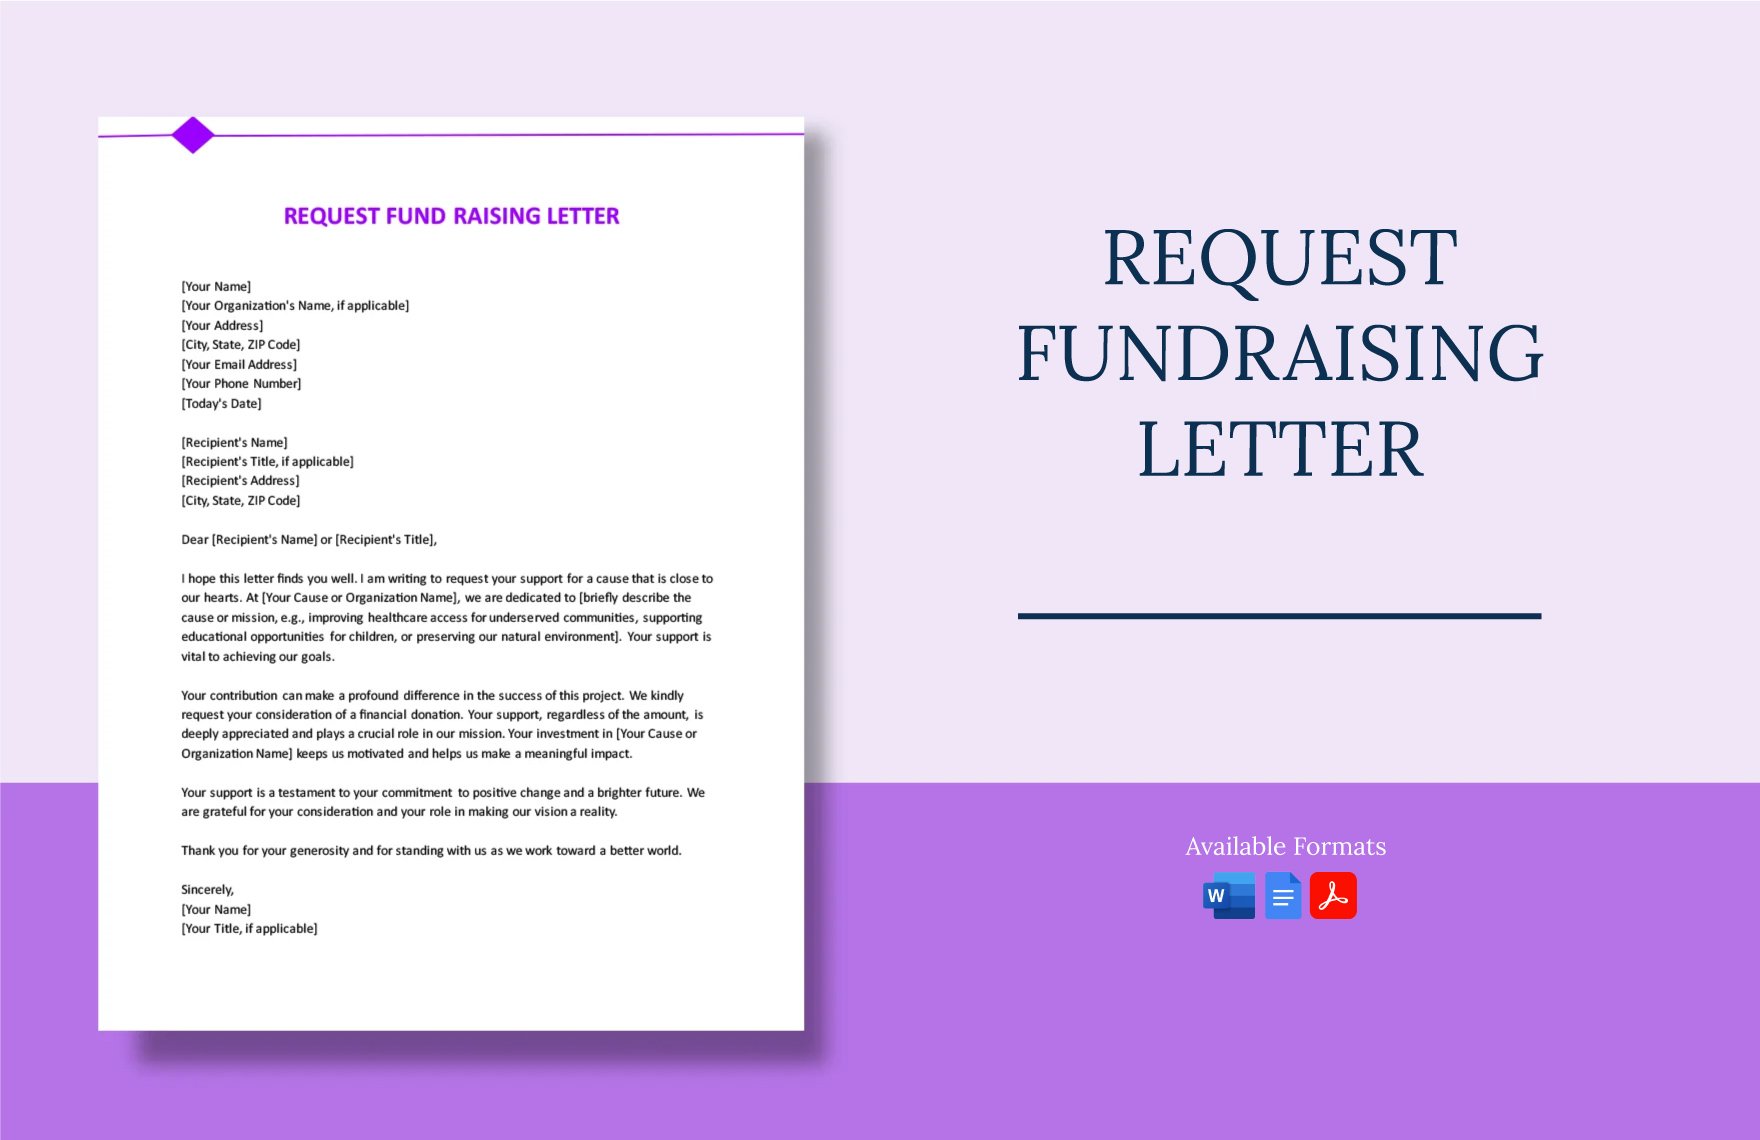 Request Fundraising Letter in Word, Google Docs, PDF